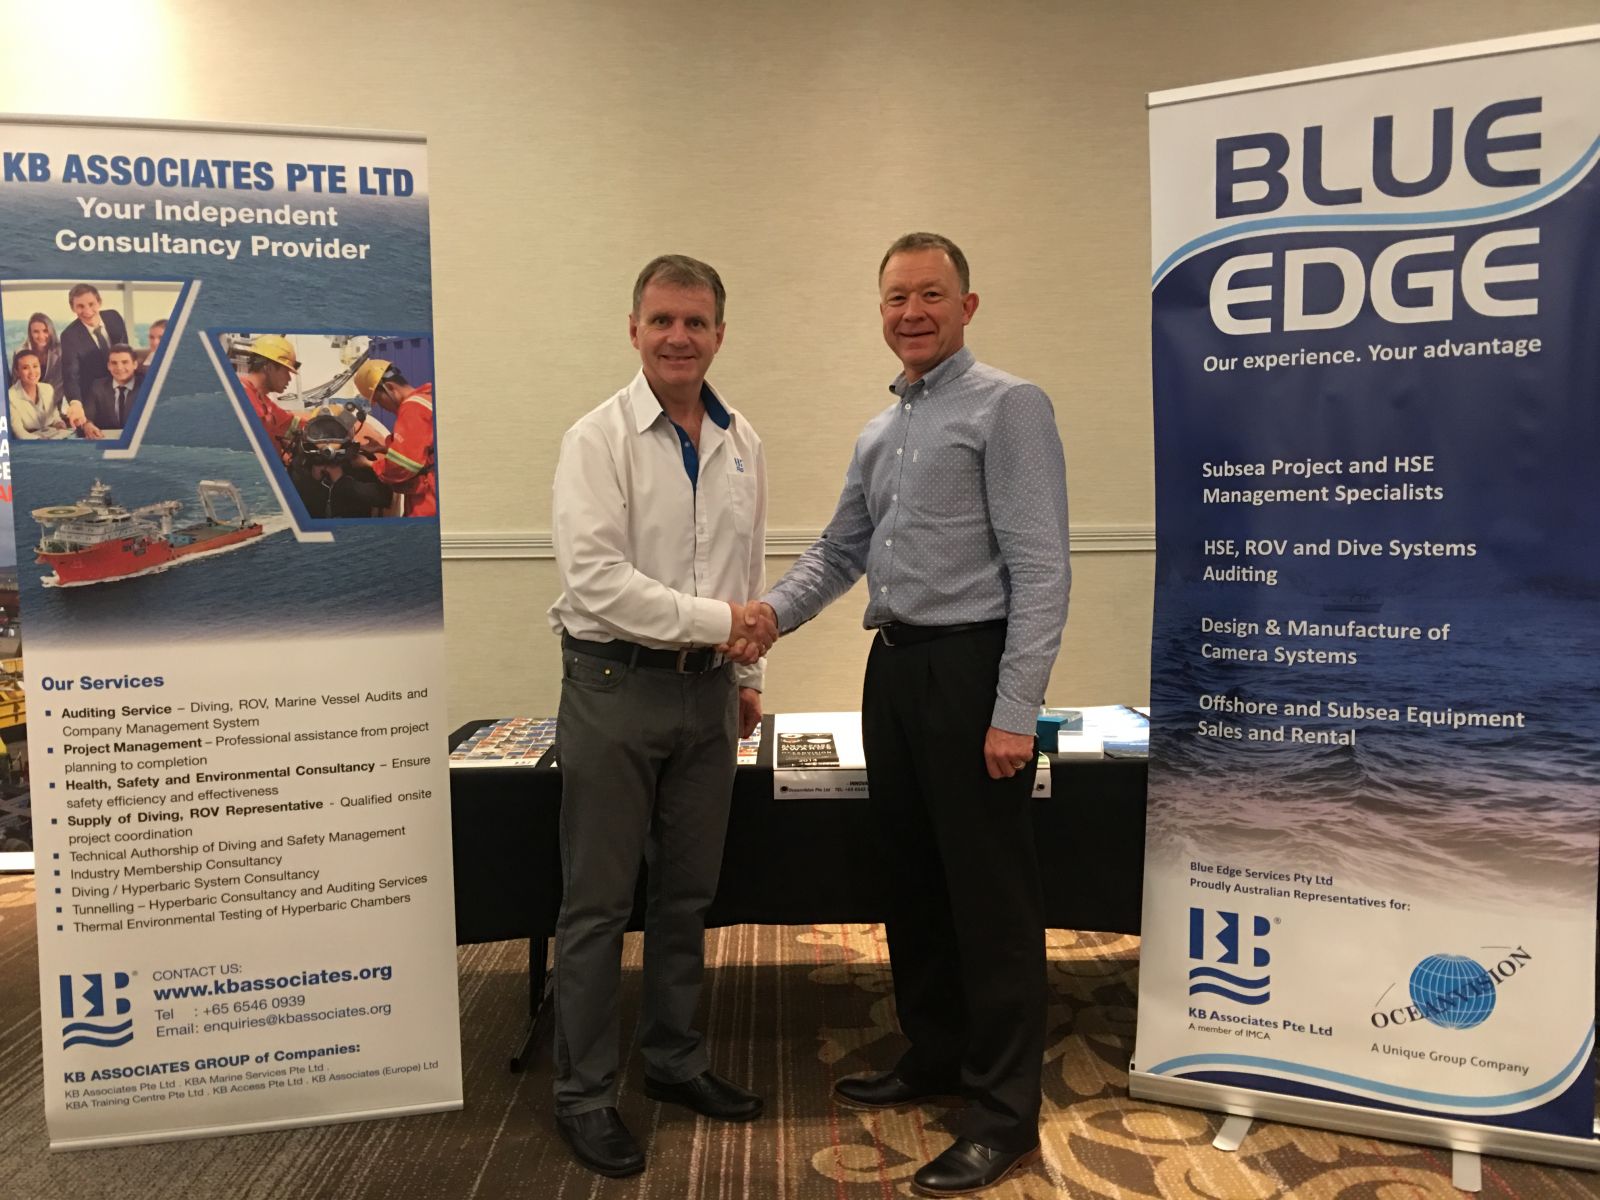 Official Collaboration with Blue Edge in Australia for a range of Auditing Works